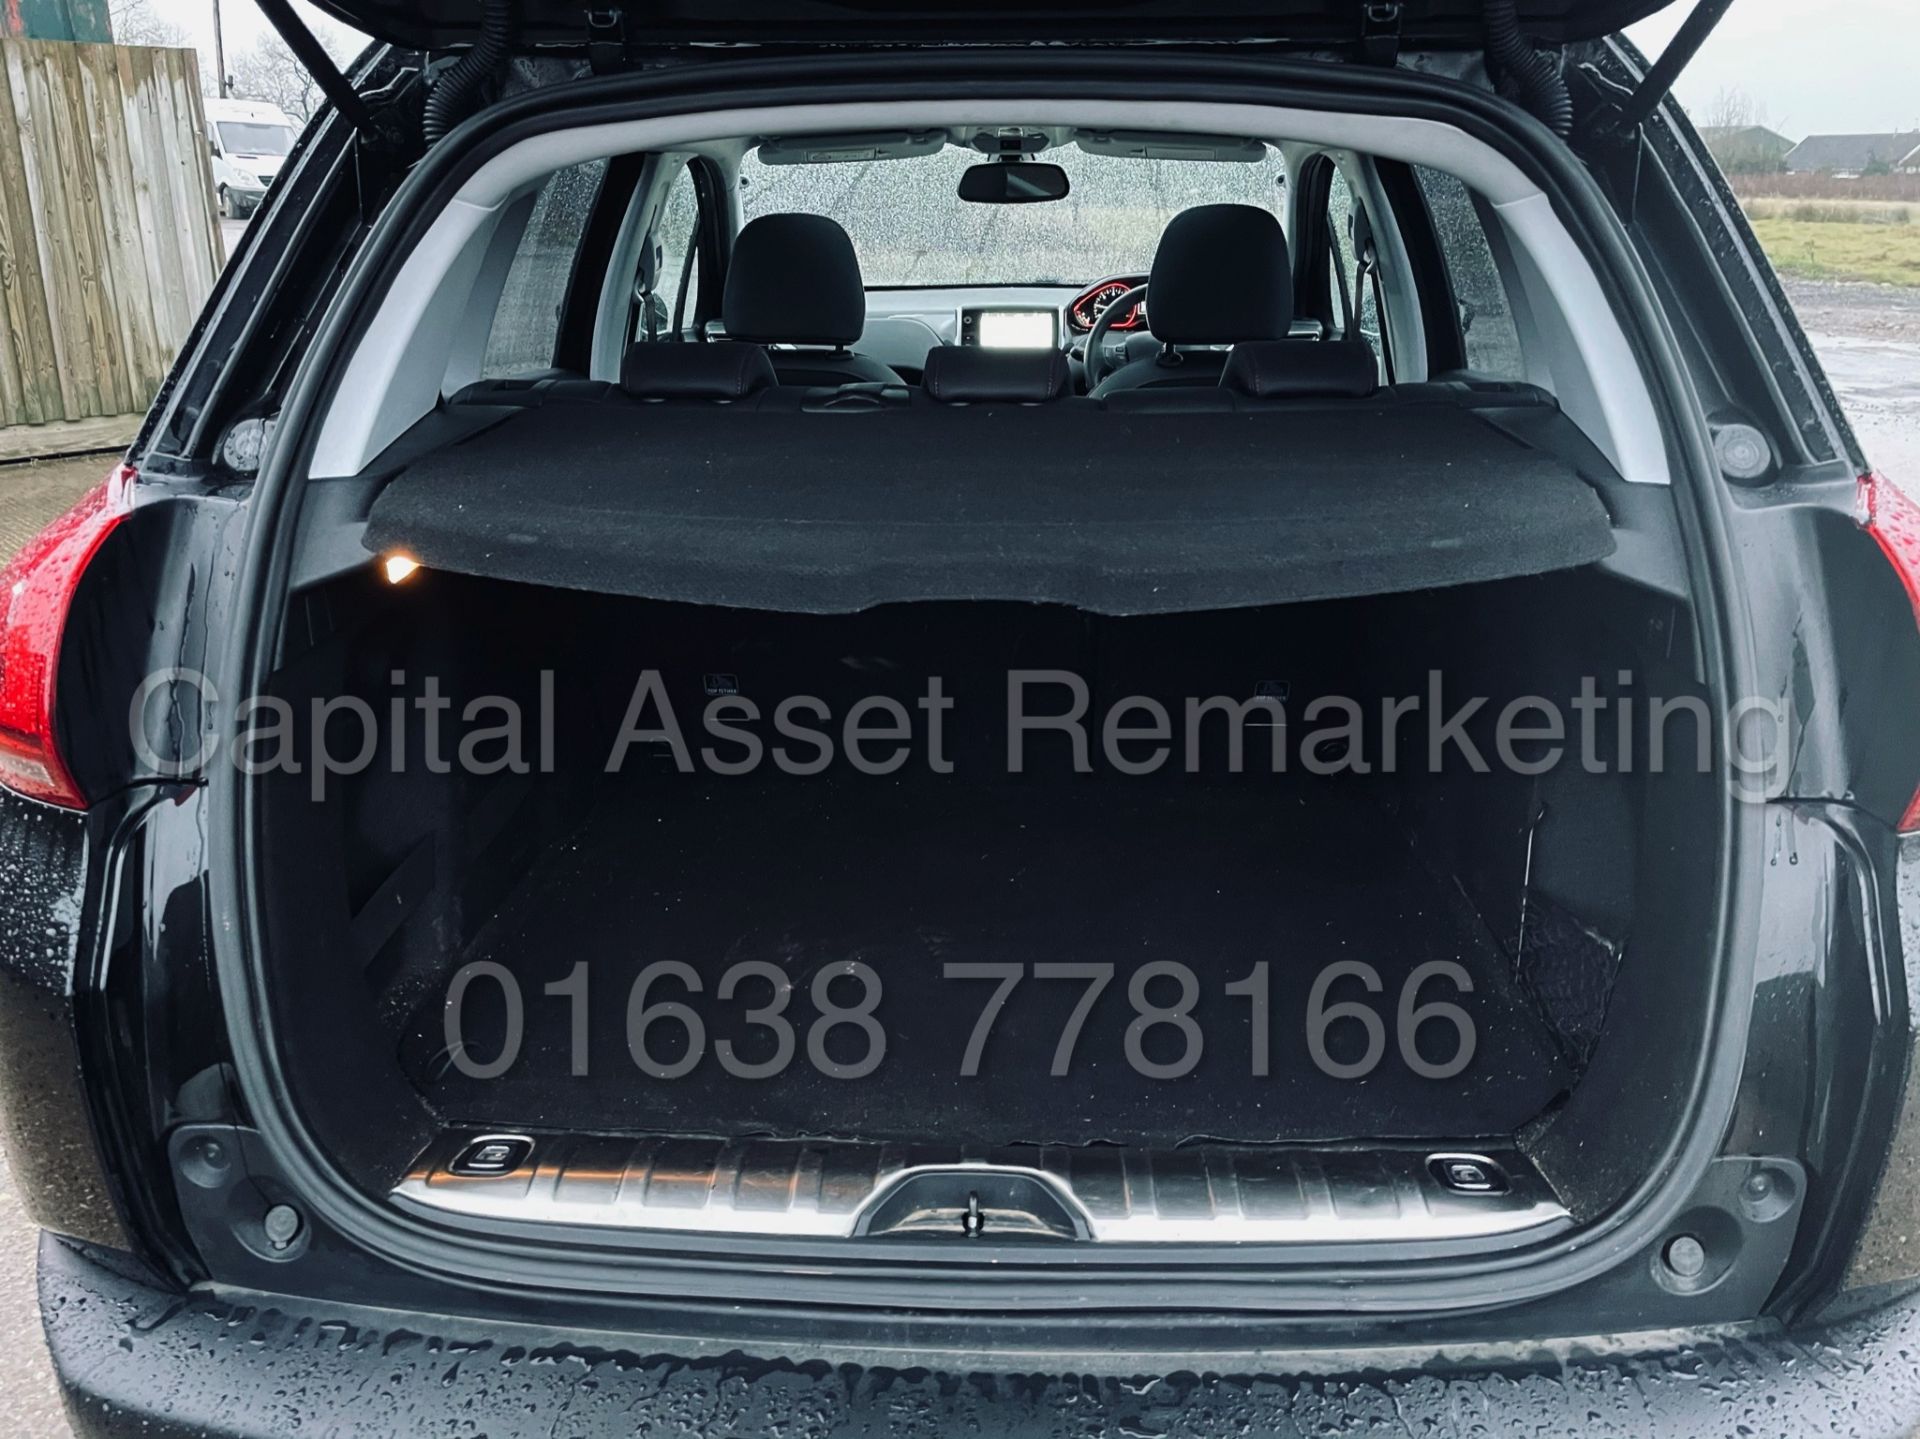 PEUGEOT 2008 *GT LINE* SUV / MPV (2019 - EURO 6) '1.5 BLUE HDI' *SAT NAV - PAN ROOF' *LOW MILES* - Image 24 of 46